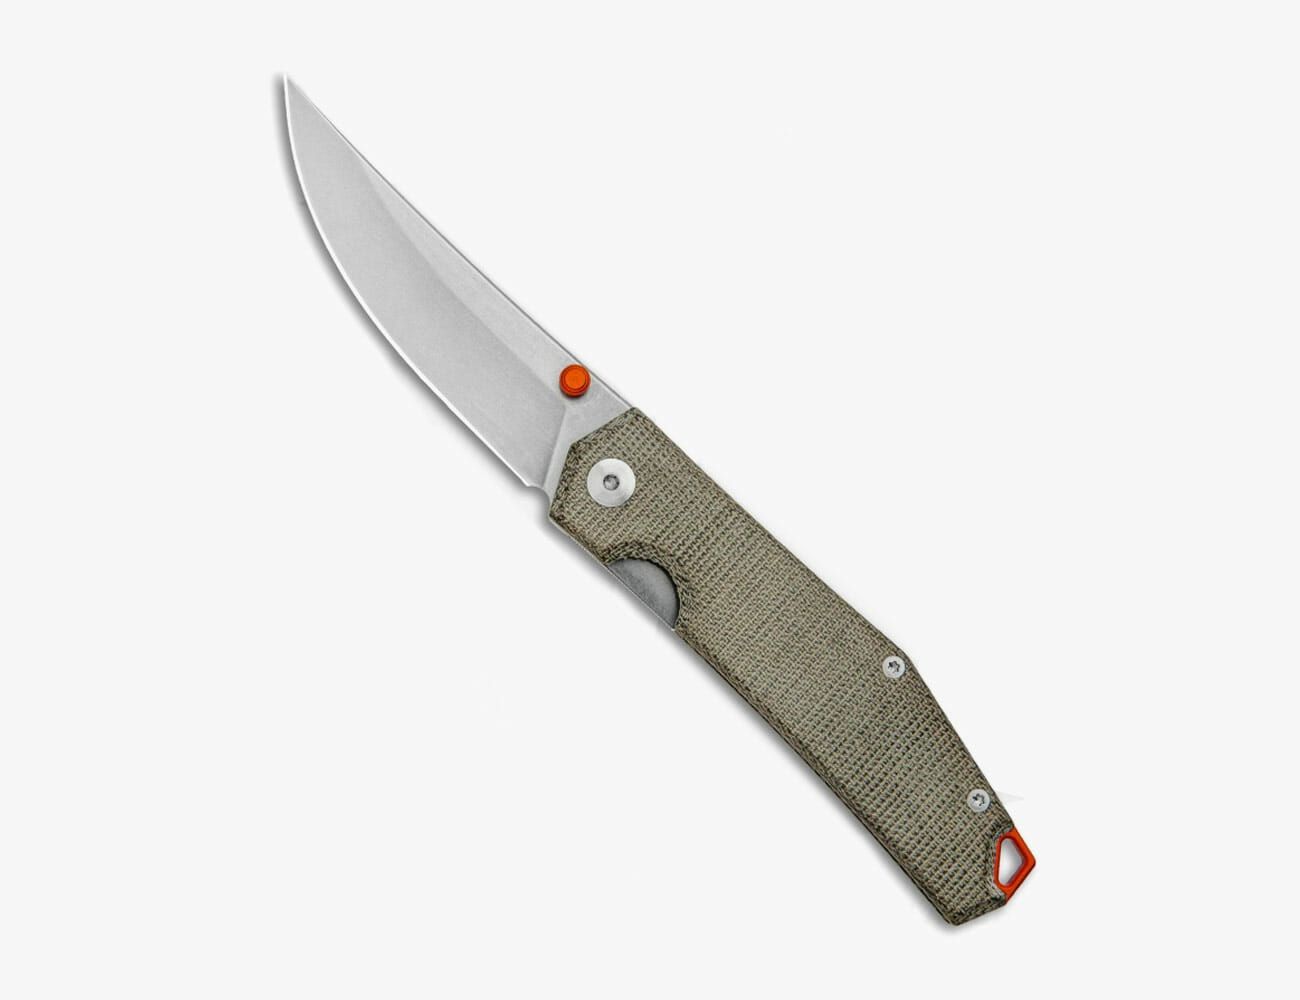 https://hips.hearstapps.com/vader-prod.s3.amazonaws.com/1704301961-Best-New-Knives-and-EDC-GiantMouse-Clyde-gear-patrol.jpg